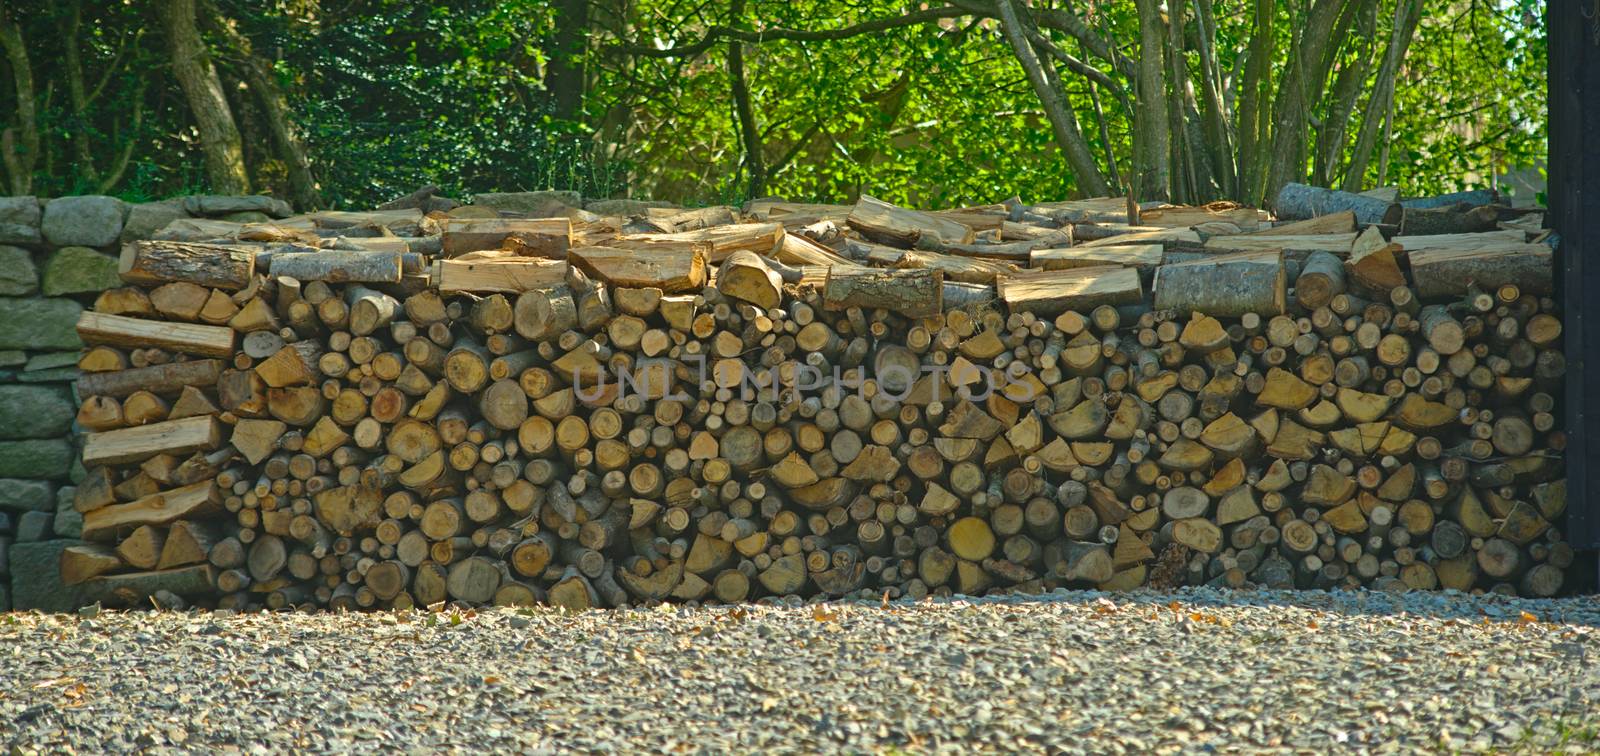 Nicely assorted pile of wood for heating during winter